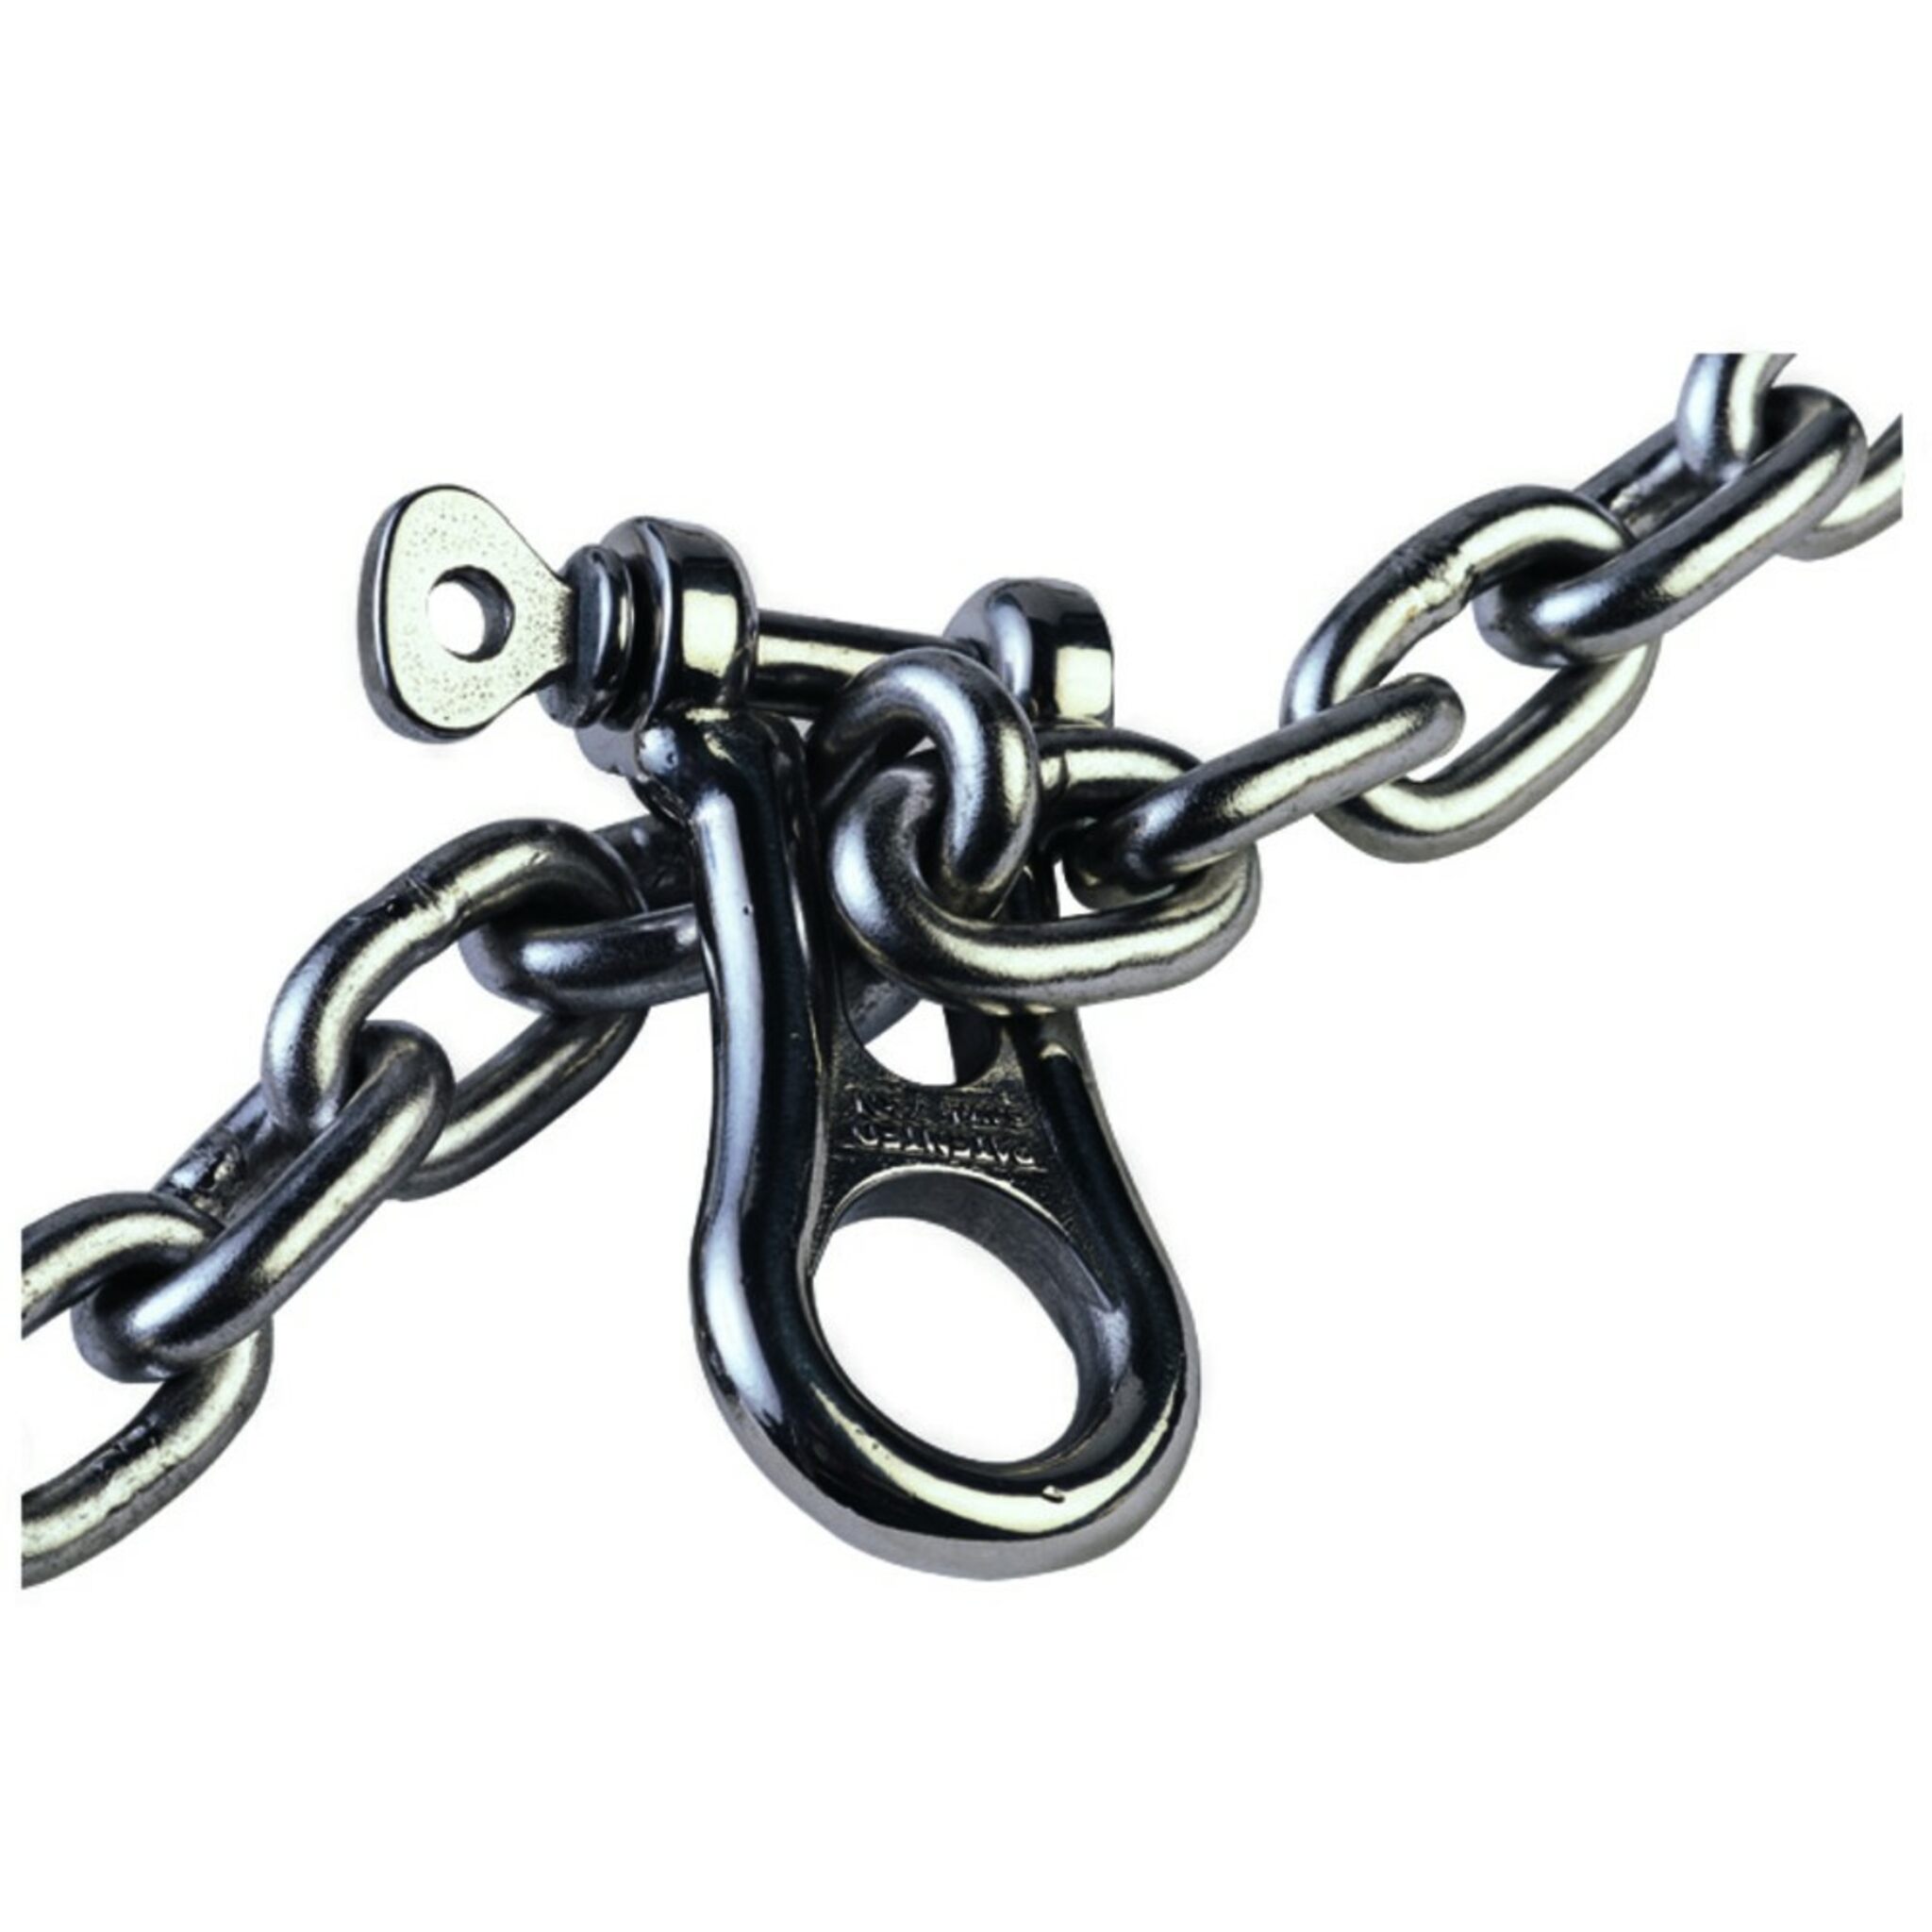 Stainless steel chain shackle